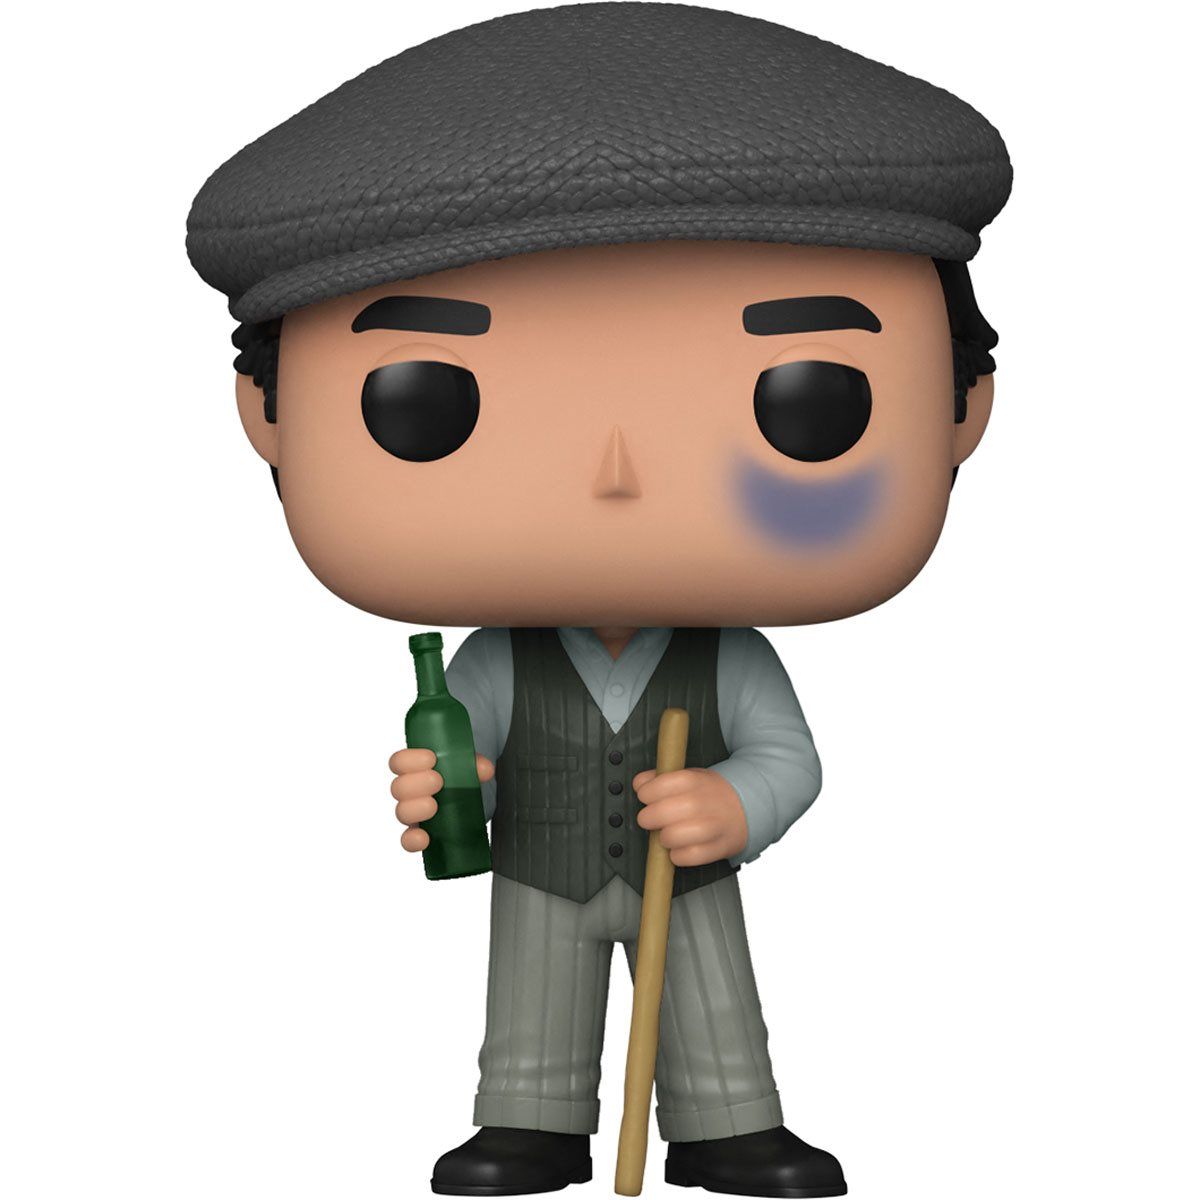 Celebrate The Godfather’s 50th Anniversary With Brand-New Funko Pops